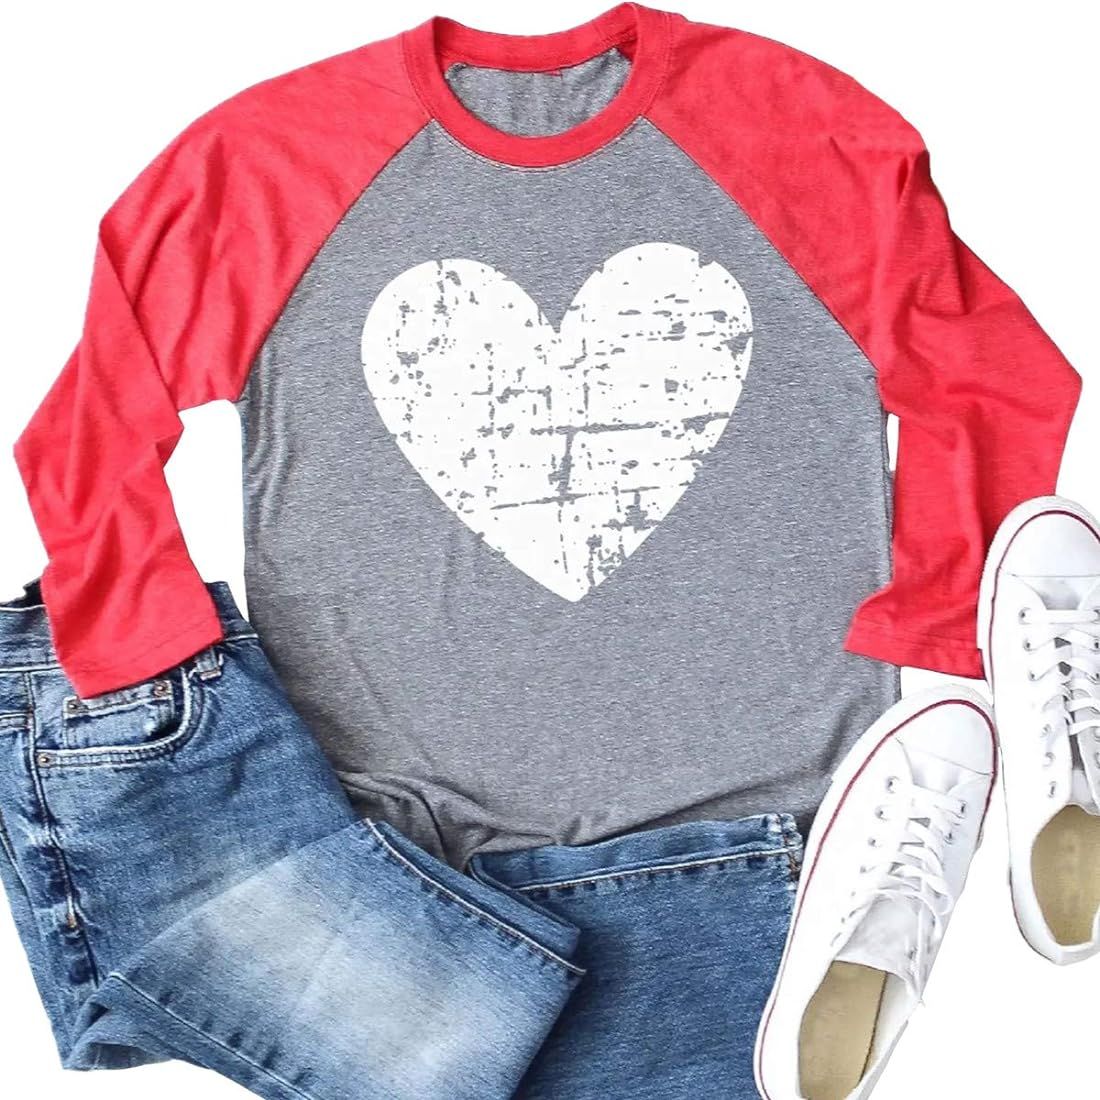 Beopjesk Womens Love Heart Raglans T-Shirts Casual Long Sleeve Valentine's Day Graphic Tees Tops | Amazon (US)